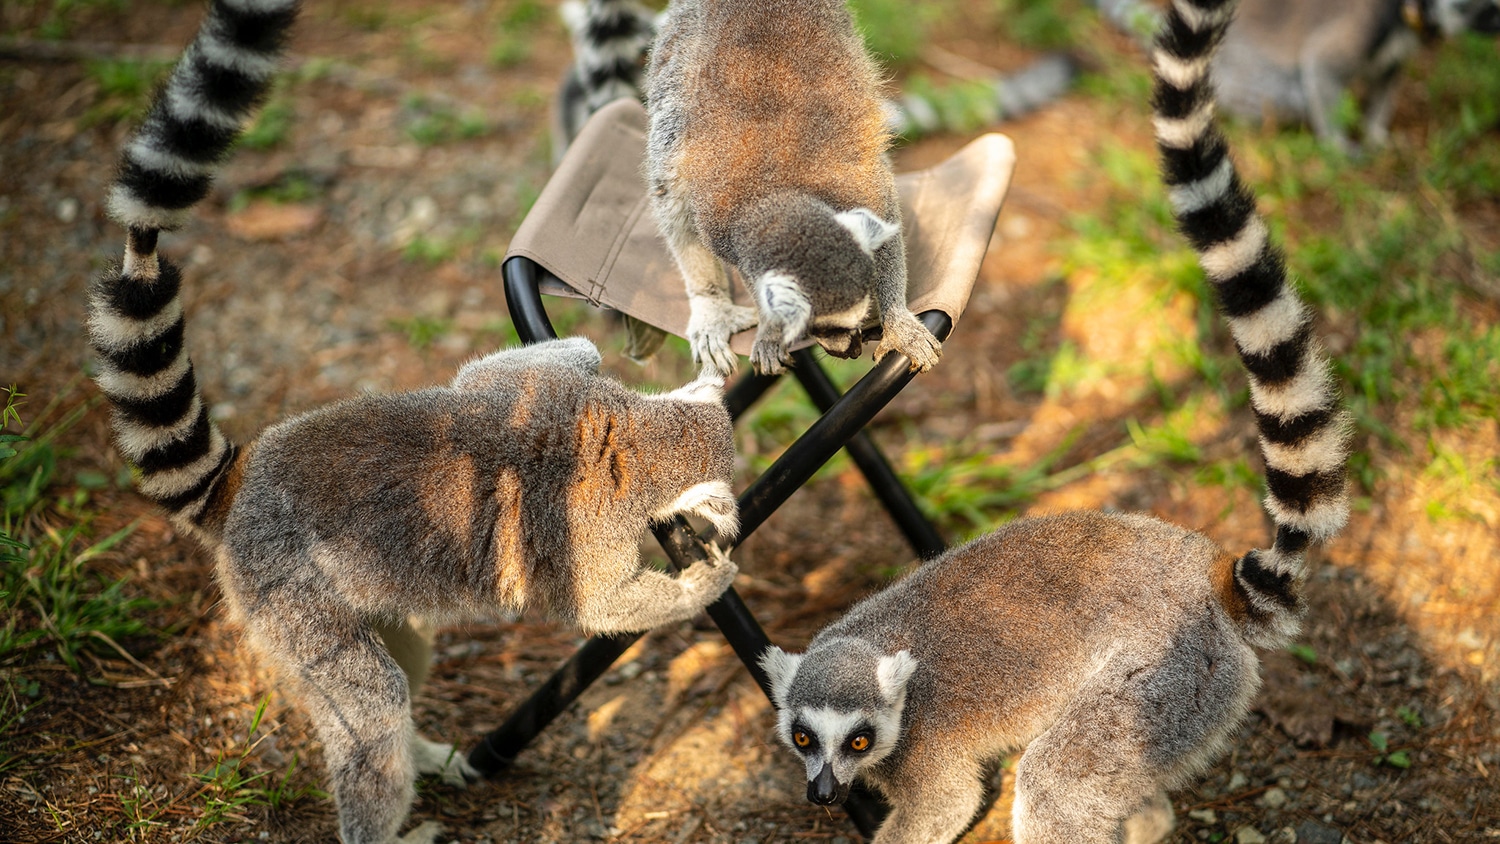 Three lemurs crawl on and around a small stool in a forest